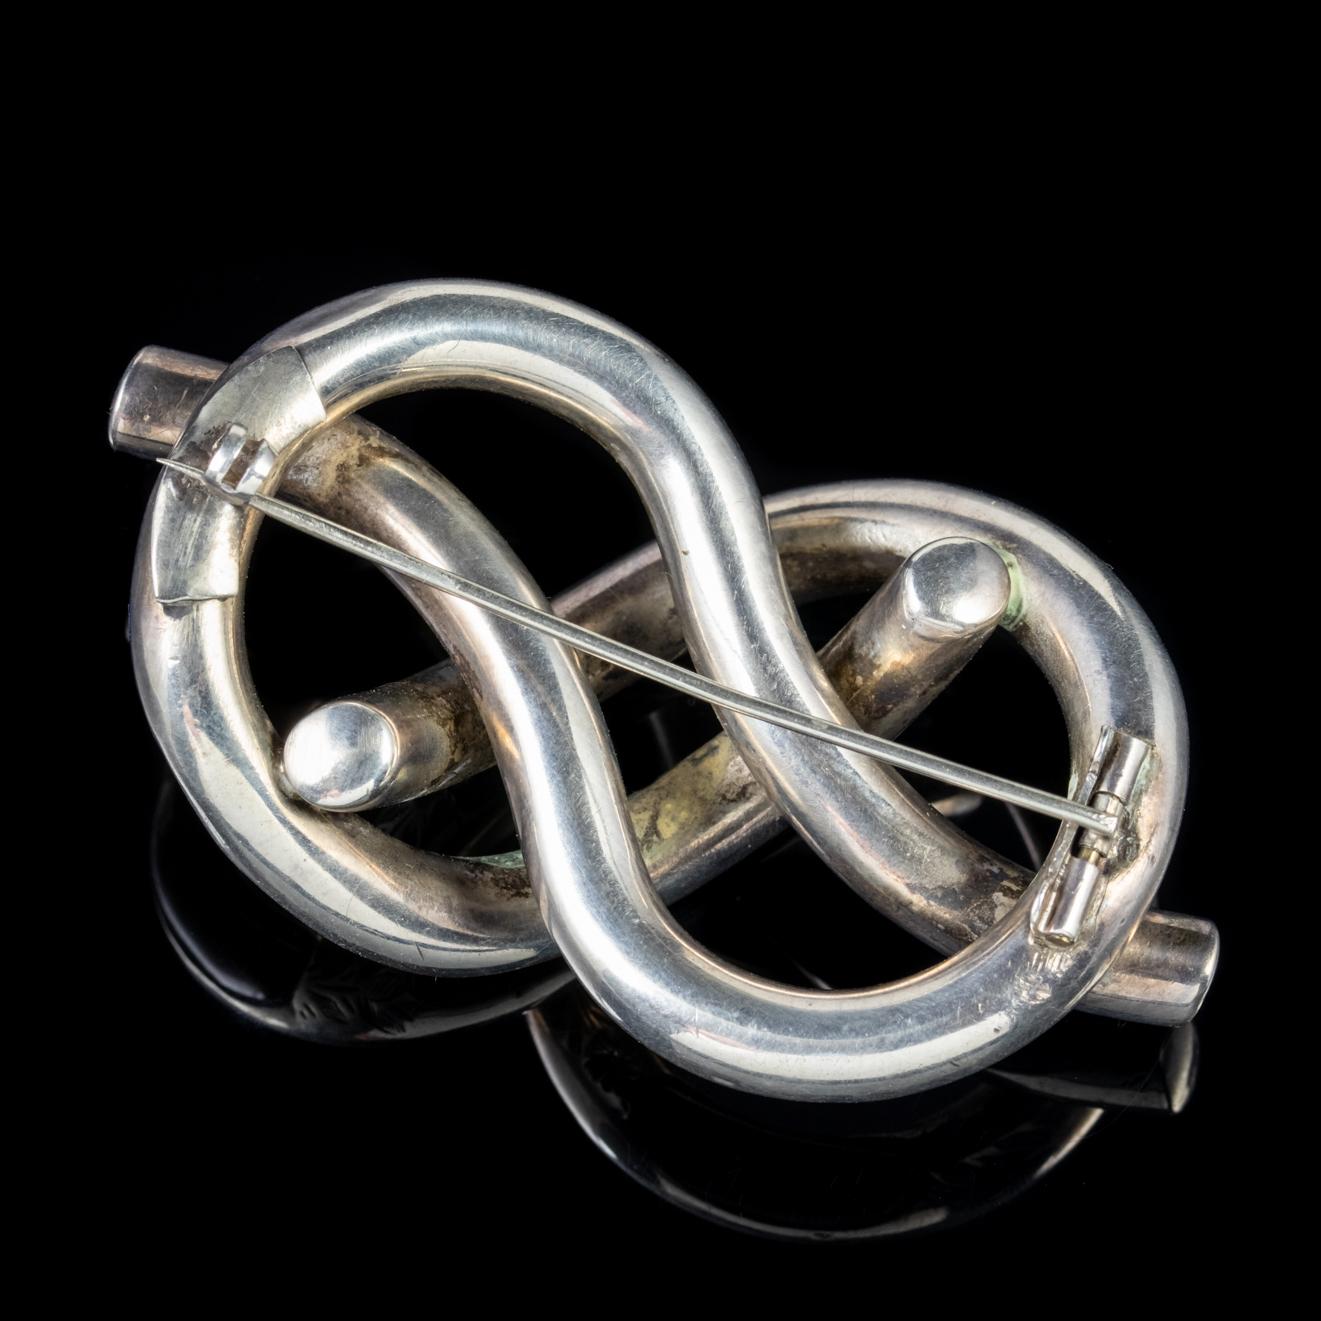 A unique Victorian Scottish brooch in a wonderful interweaving knot design with floral engraved artistry and polished inlaid Agates. 

Scottish jewellery was made popular by Queen Victoria as it became a souvenir of her frequent trips to Scotland